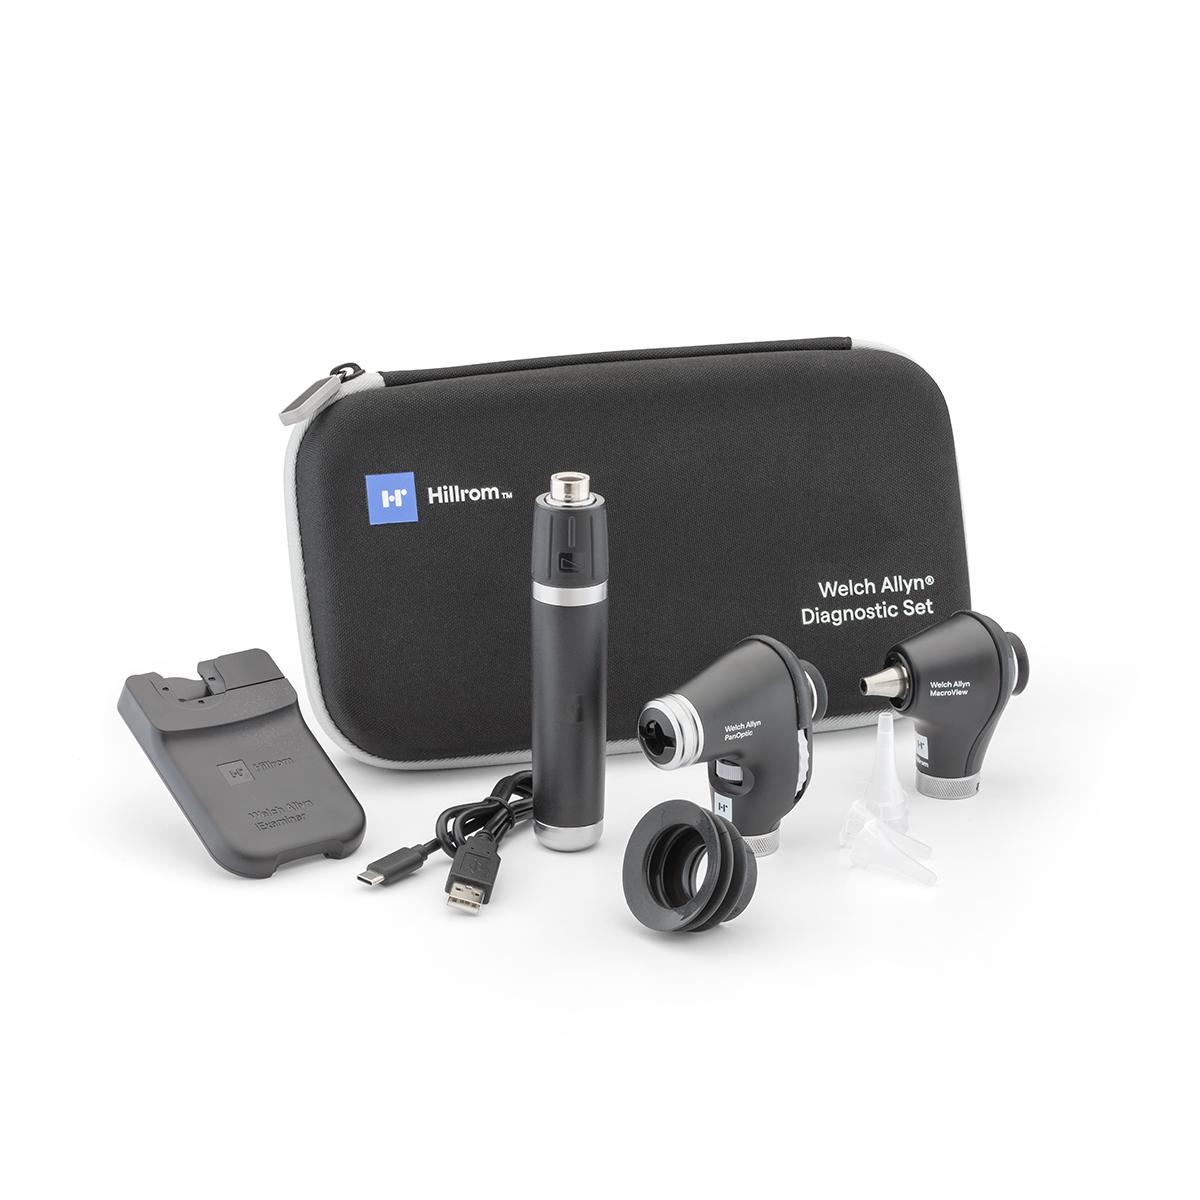 A Welch Allyn Diagnostic Set, including otoscope, ophthalmoscope, handle, USB charger and zippered carry case.